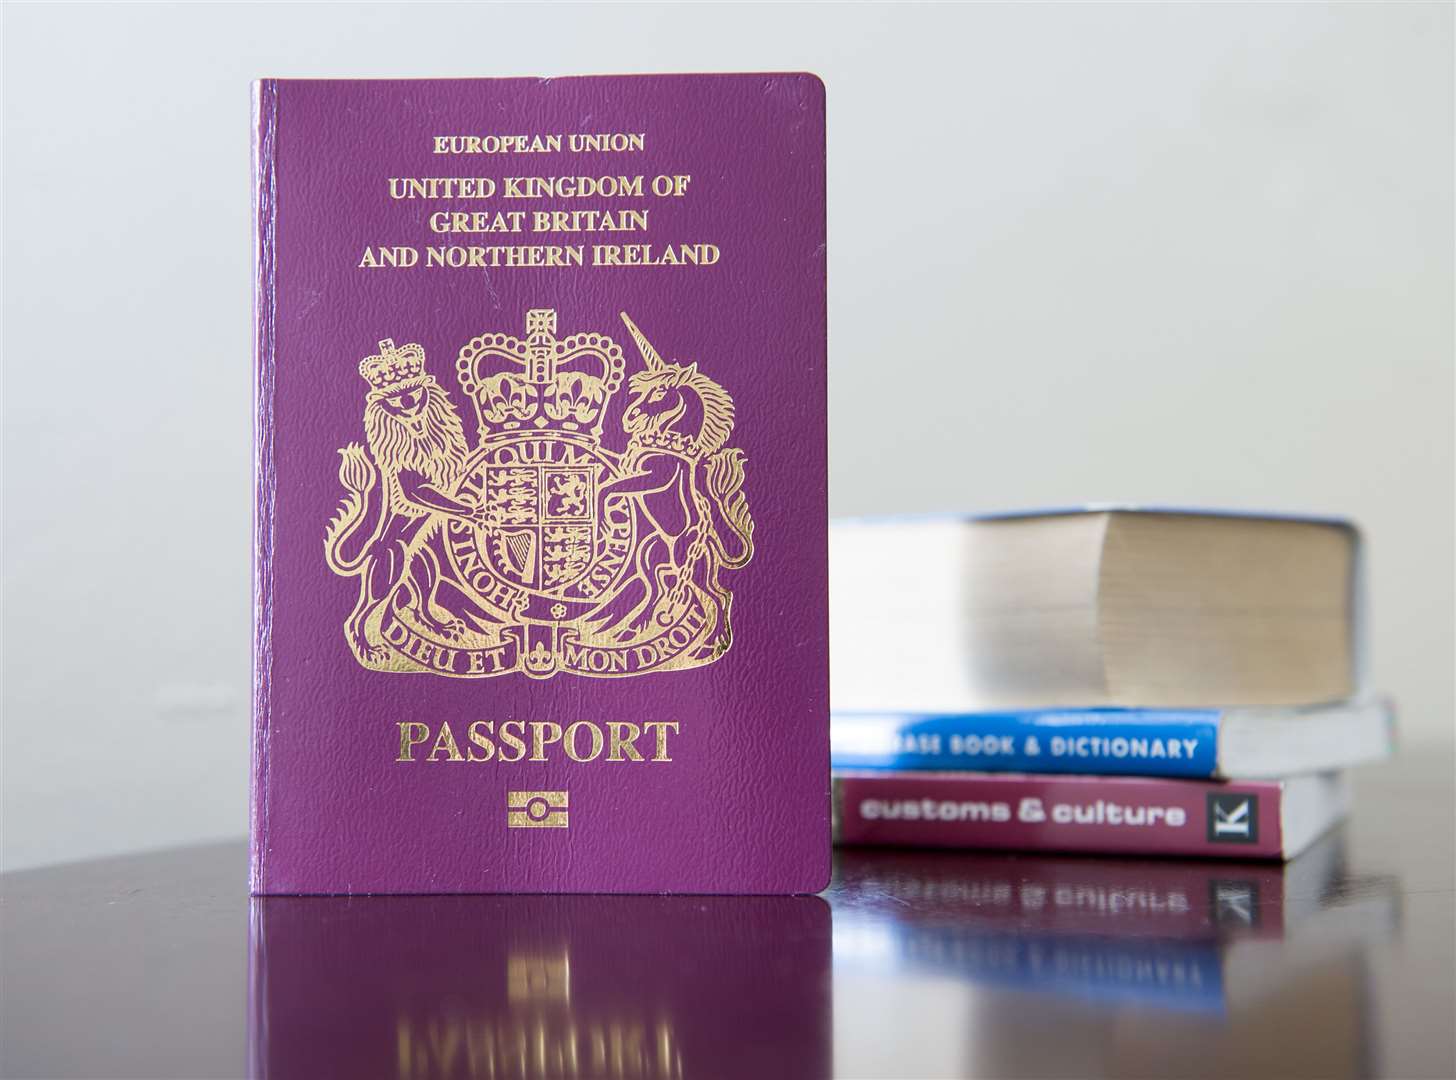 A passport is one form of accepted photographic identification to vote in England next month (Anthony Devlin/PA)